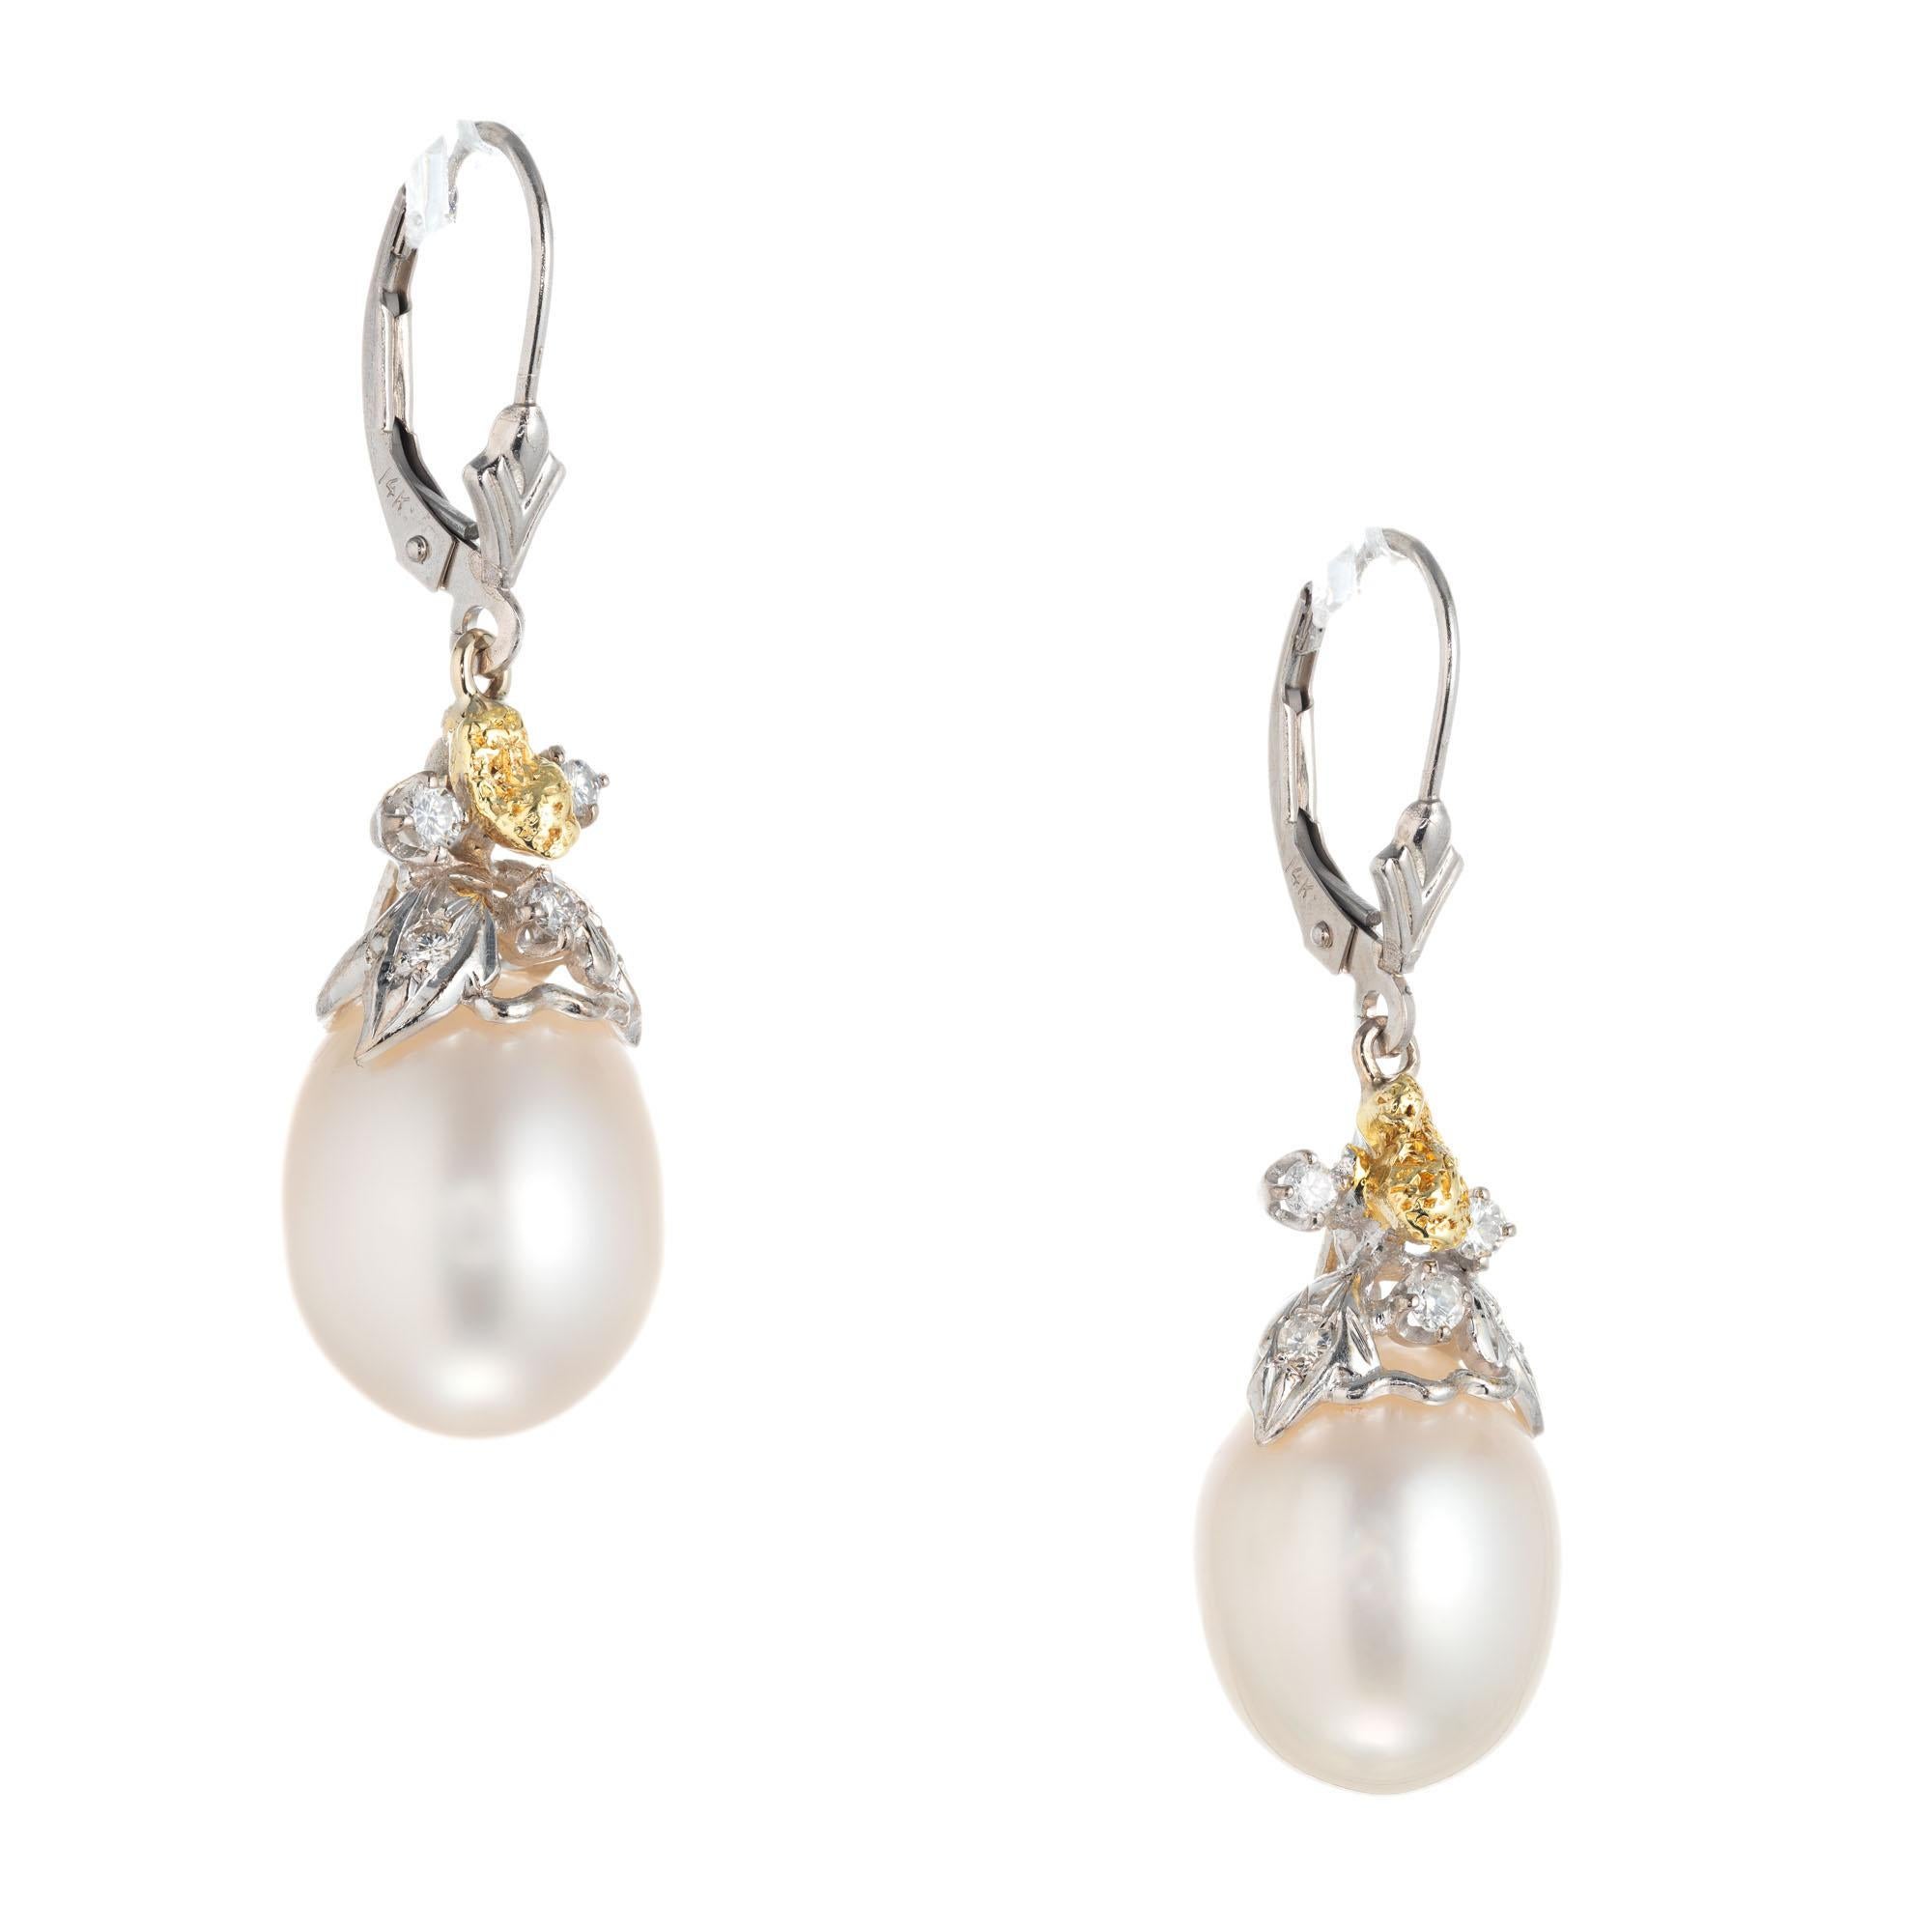 Pearl and diamond dangle earrings.  2 south sea oval pearls set in 14k yellow and white gold with round accent diamonds. Lever backs. 

2 south sea pearls. 15mmx11.7mm
10 round diamonds approx. total weight: .20cts  H, VS-SI
Length: 38.71mm or 1.52